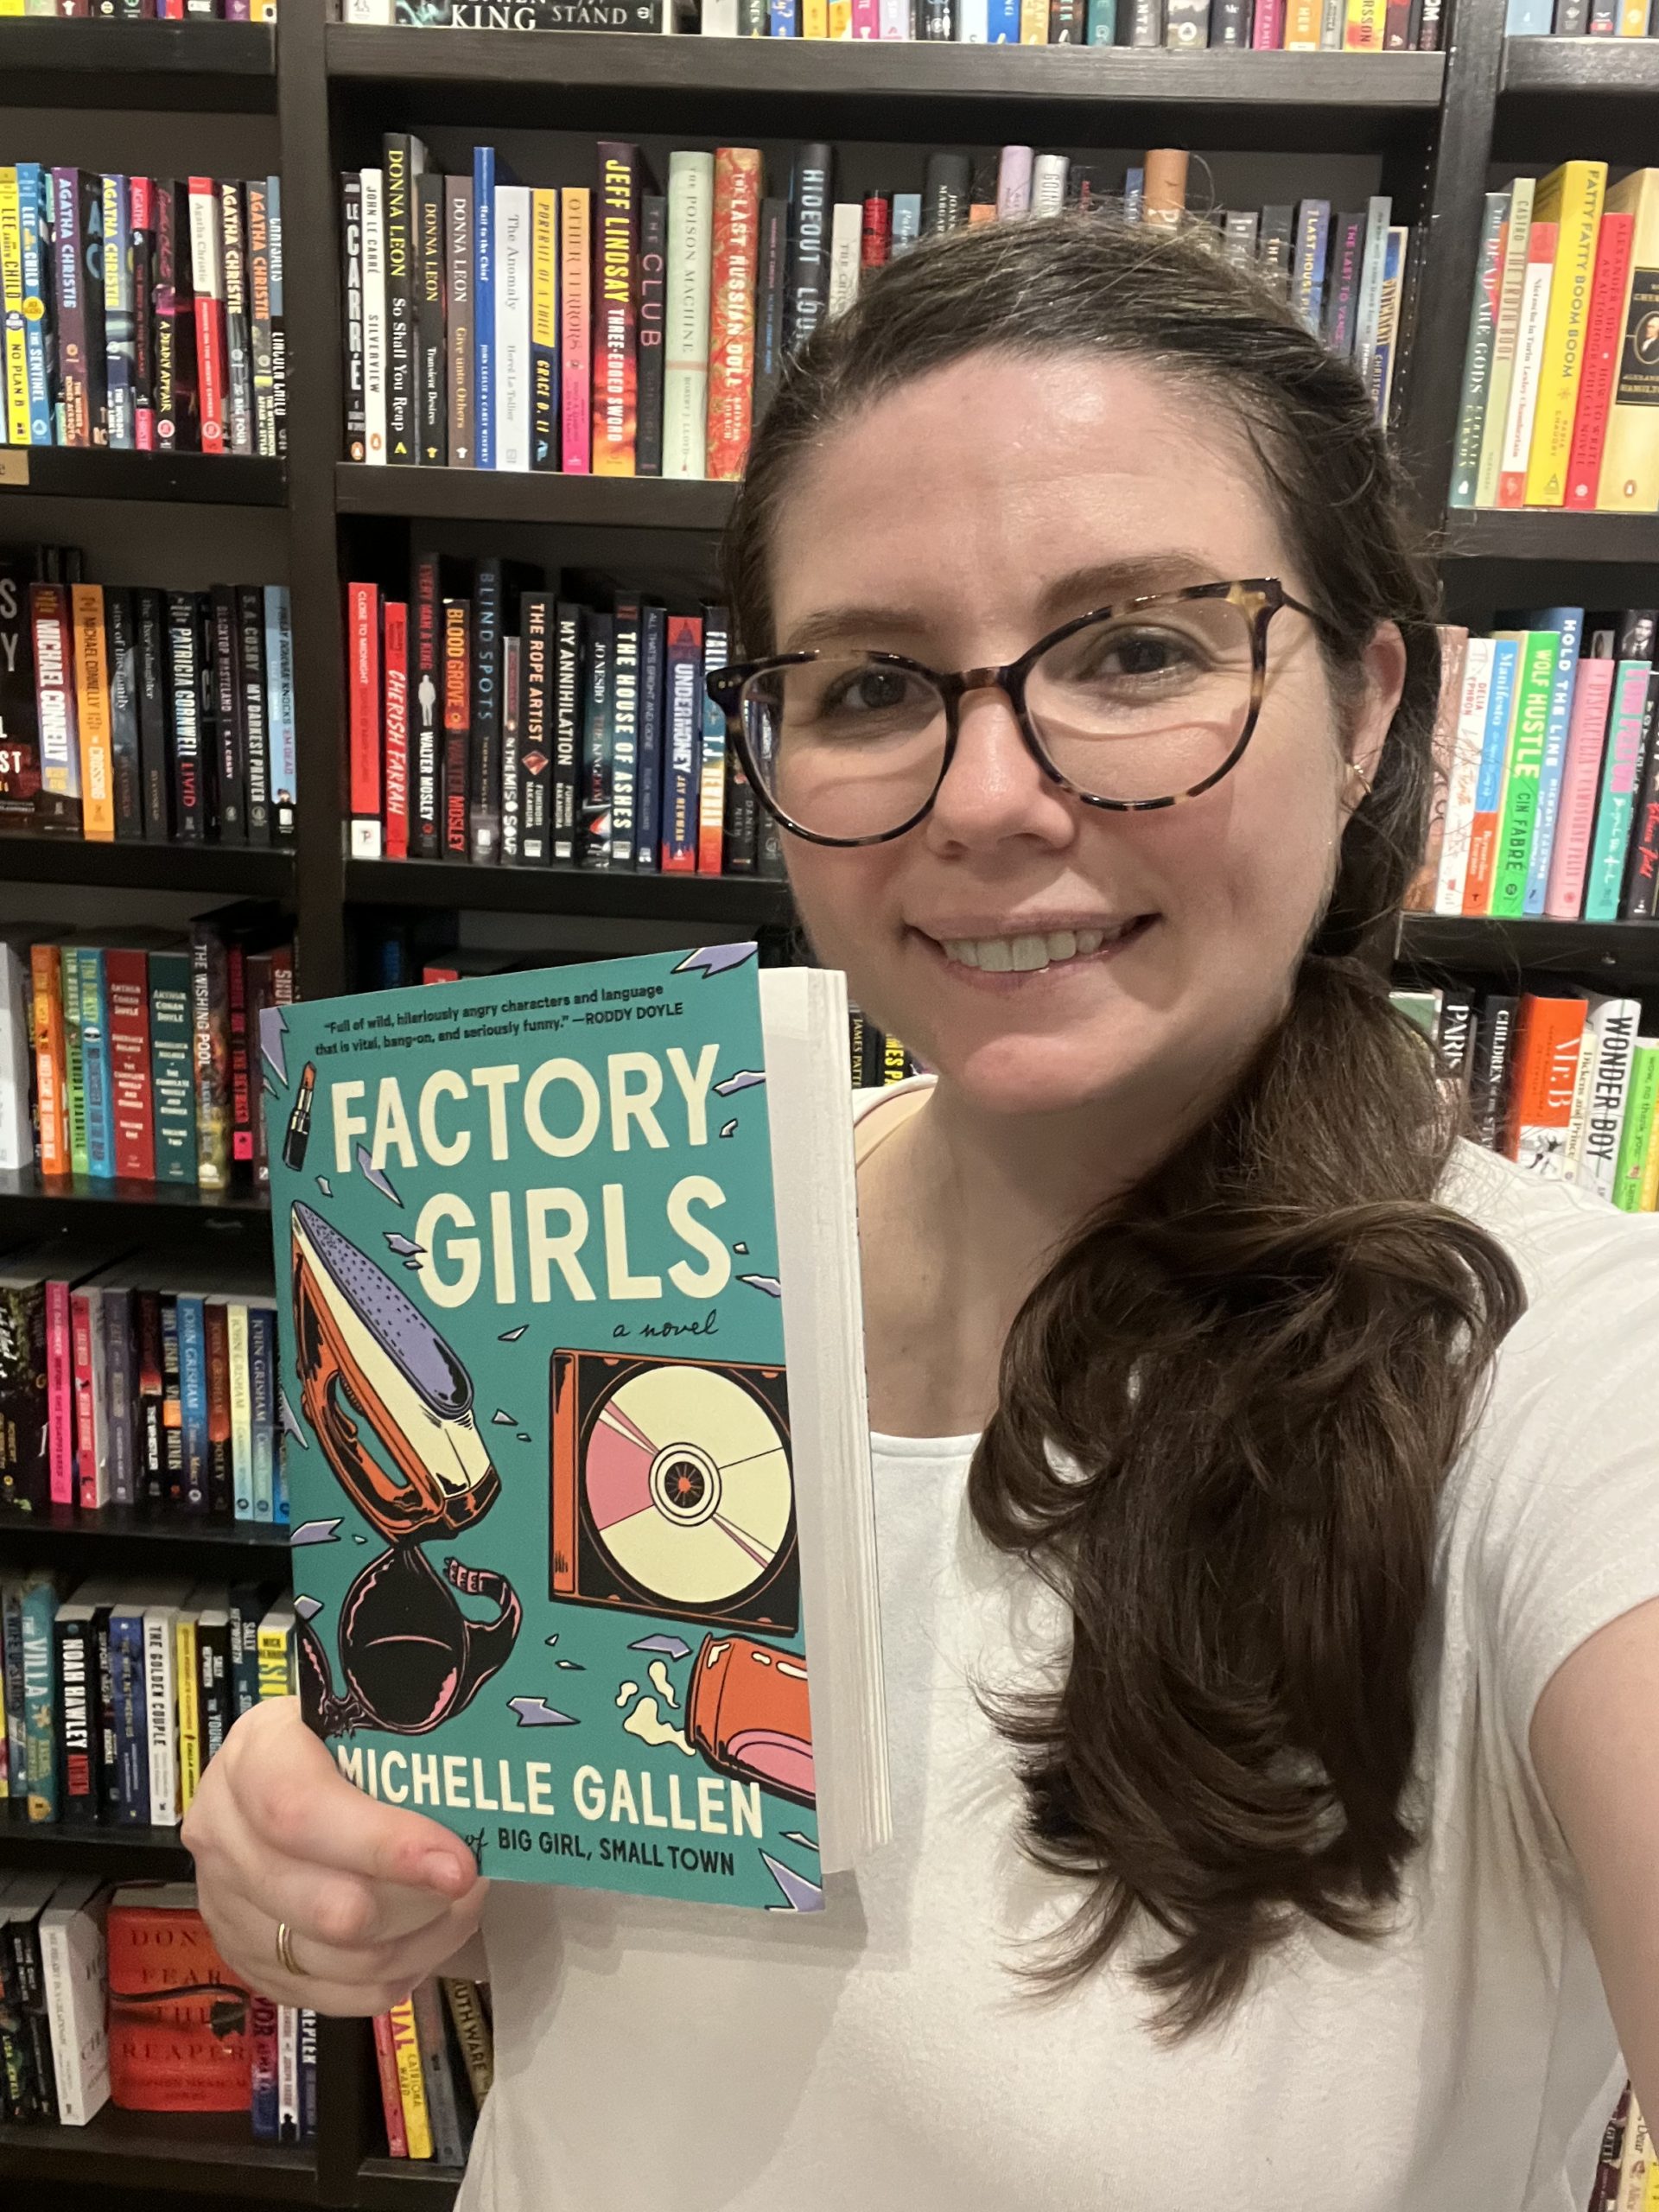 Store manager Emily with the featured staff pick for July, Factory Girls by Michelle Gallen